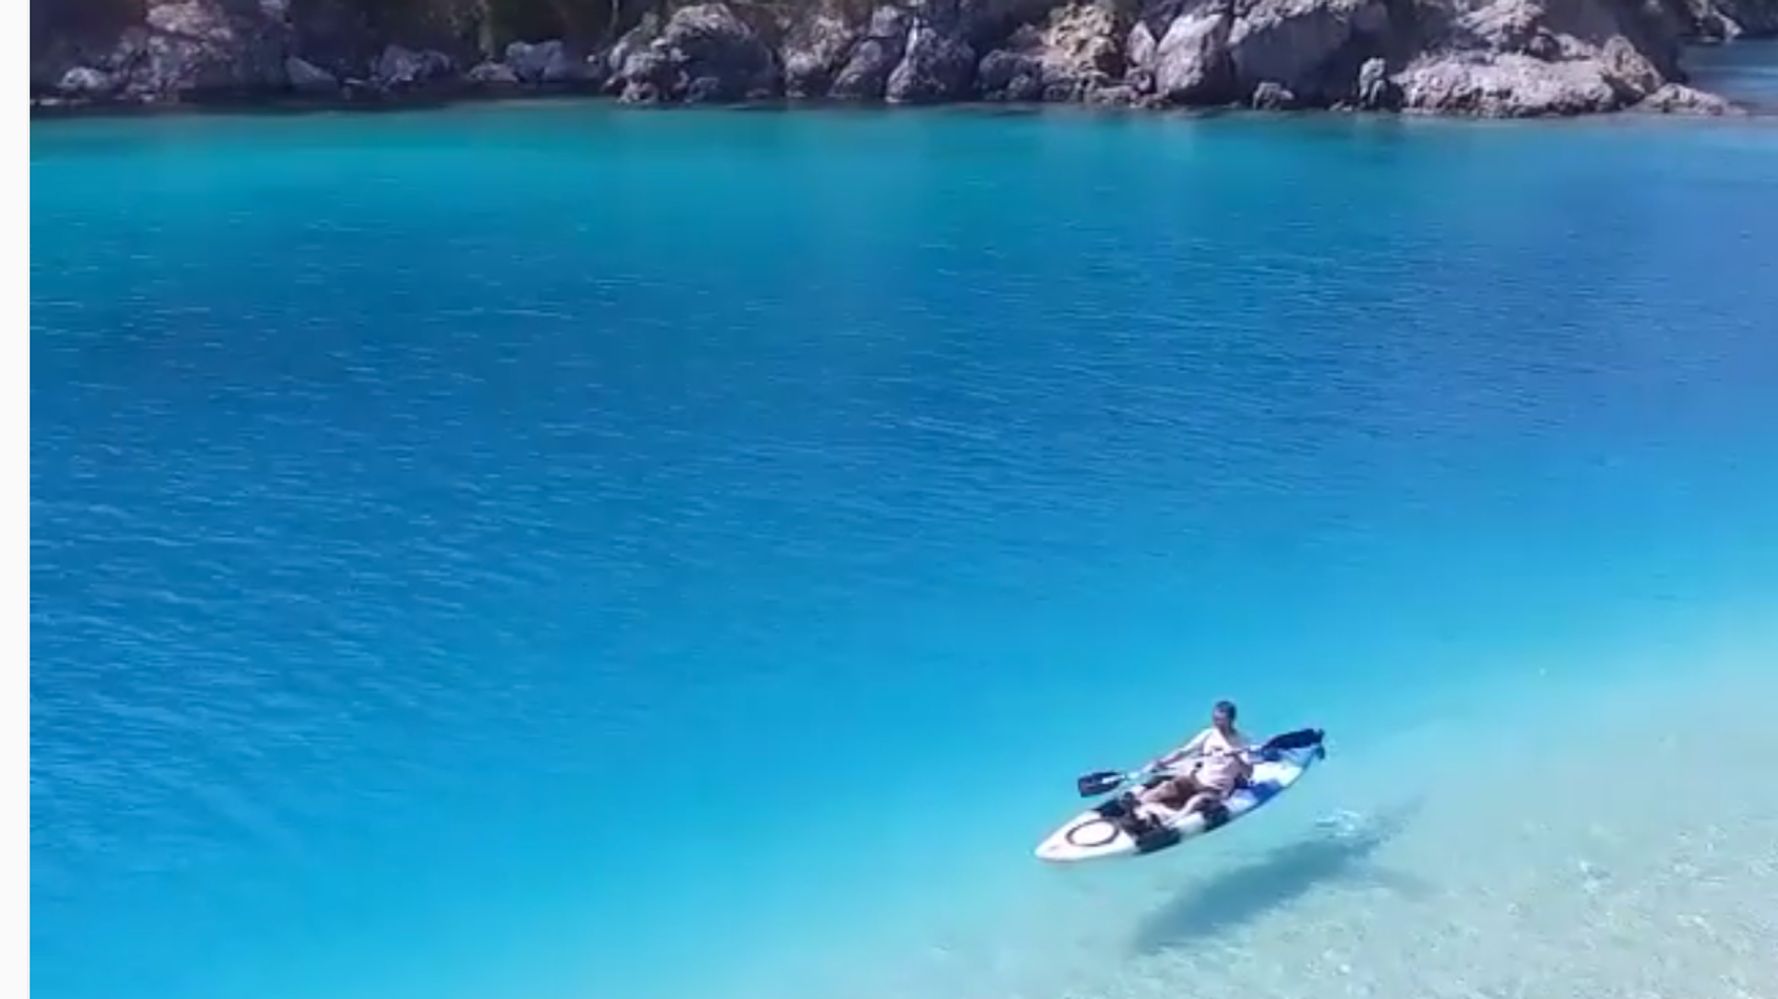 Clearest Water in the World - Clear Bodies of Water